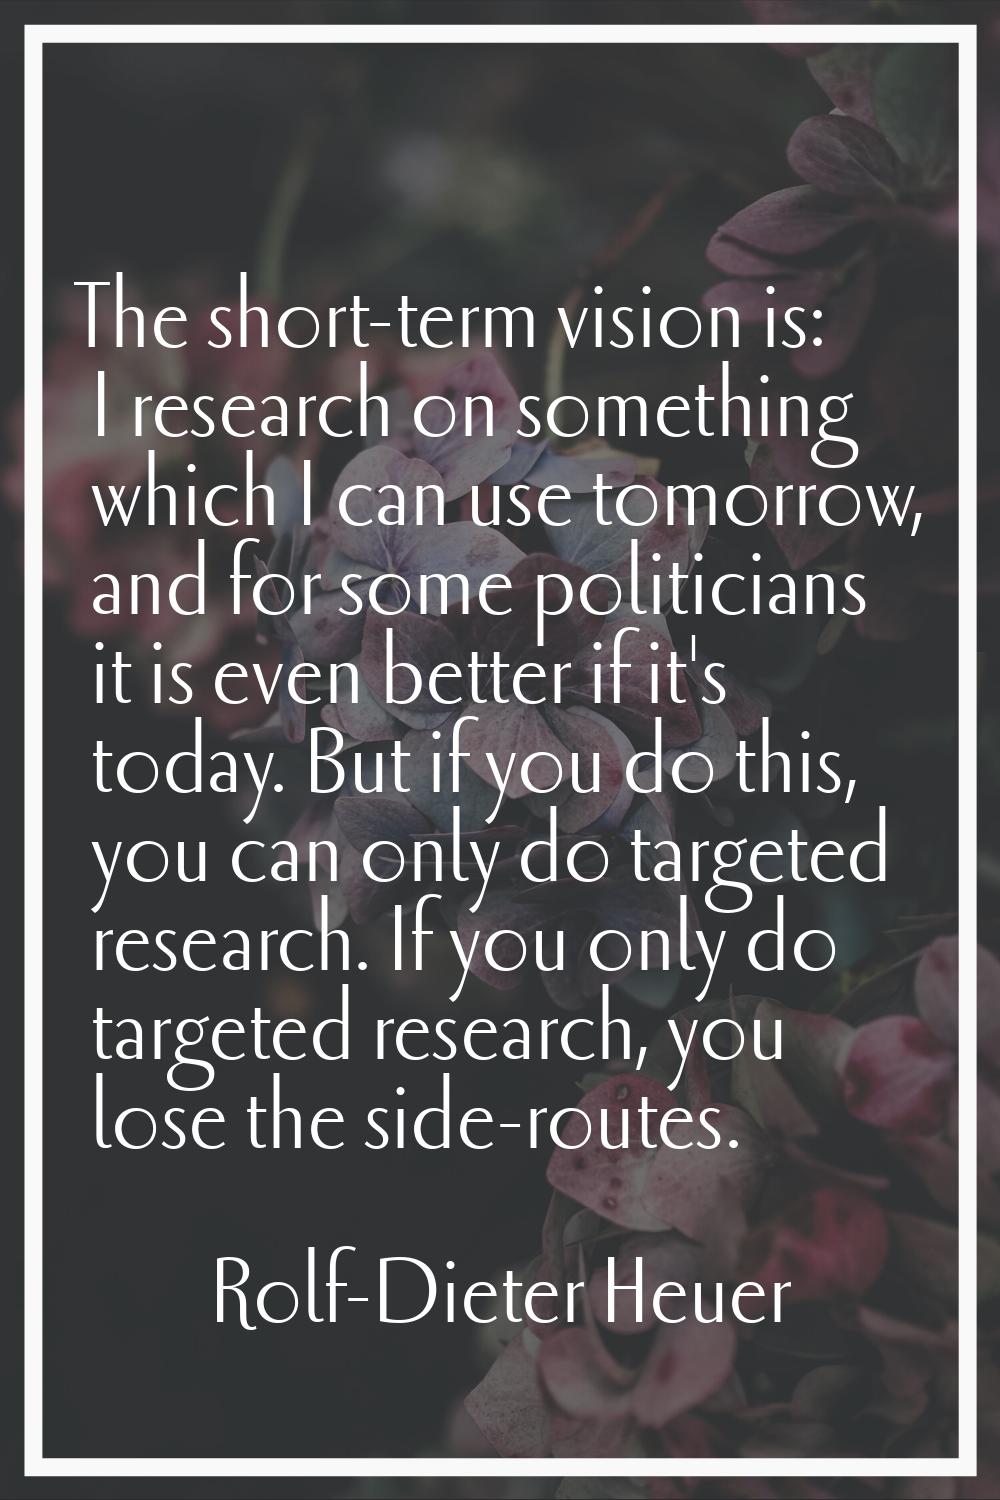 The short-term vision is: I research on something which I can use tomorrow, and for some politician